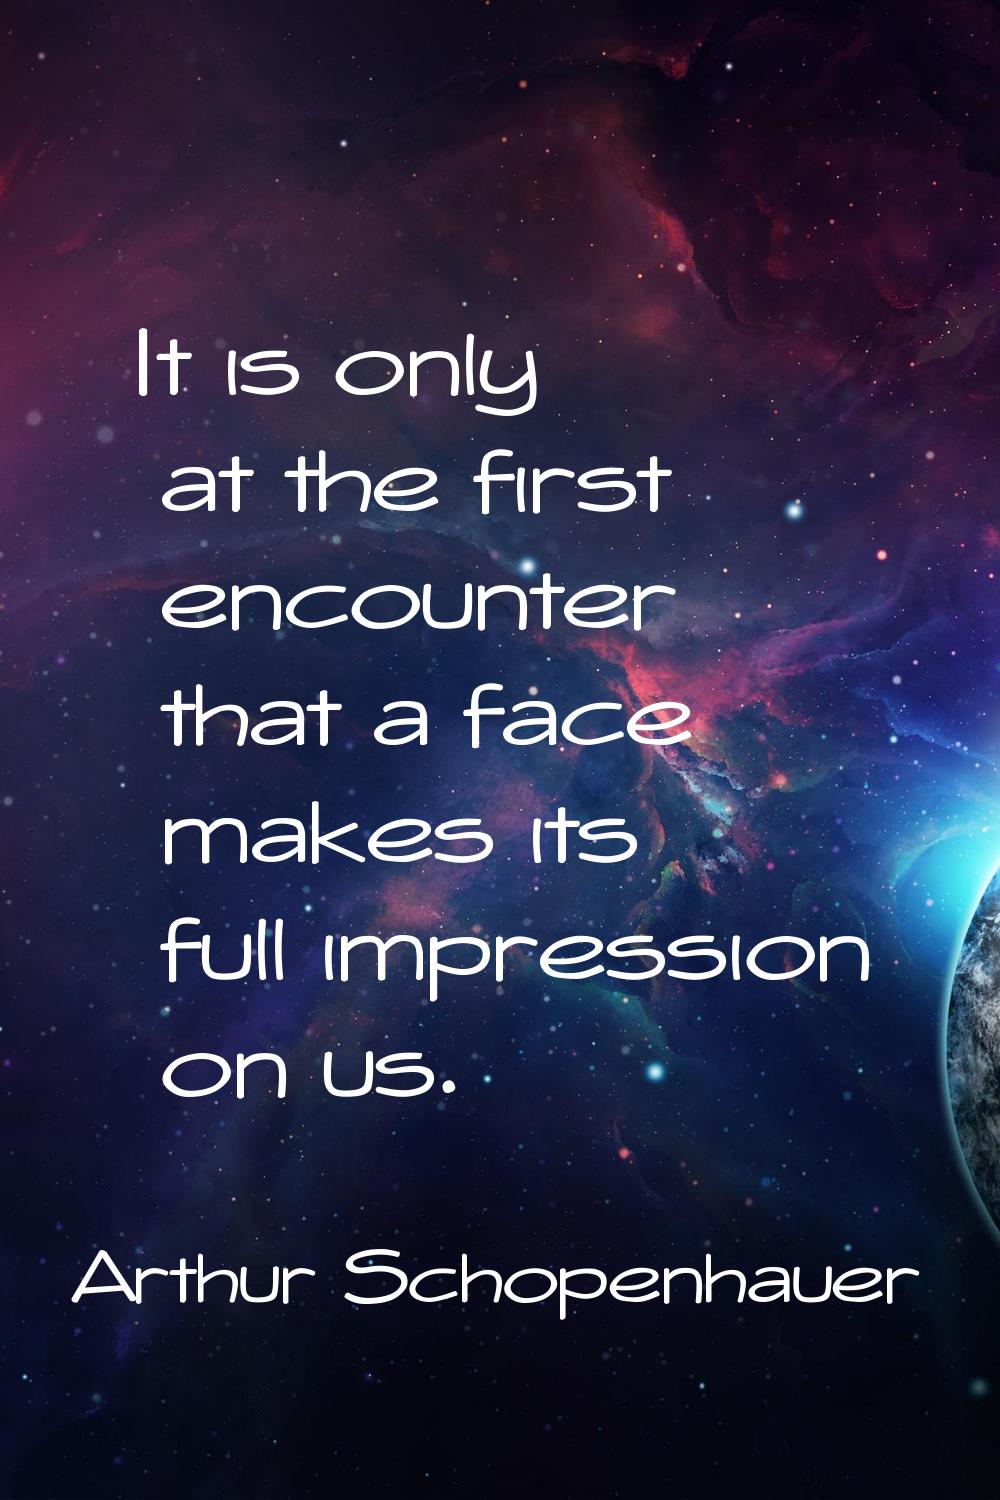 It is only at the first encounter that a face makes its full impression on us.